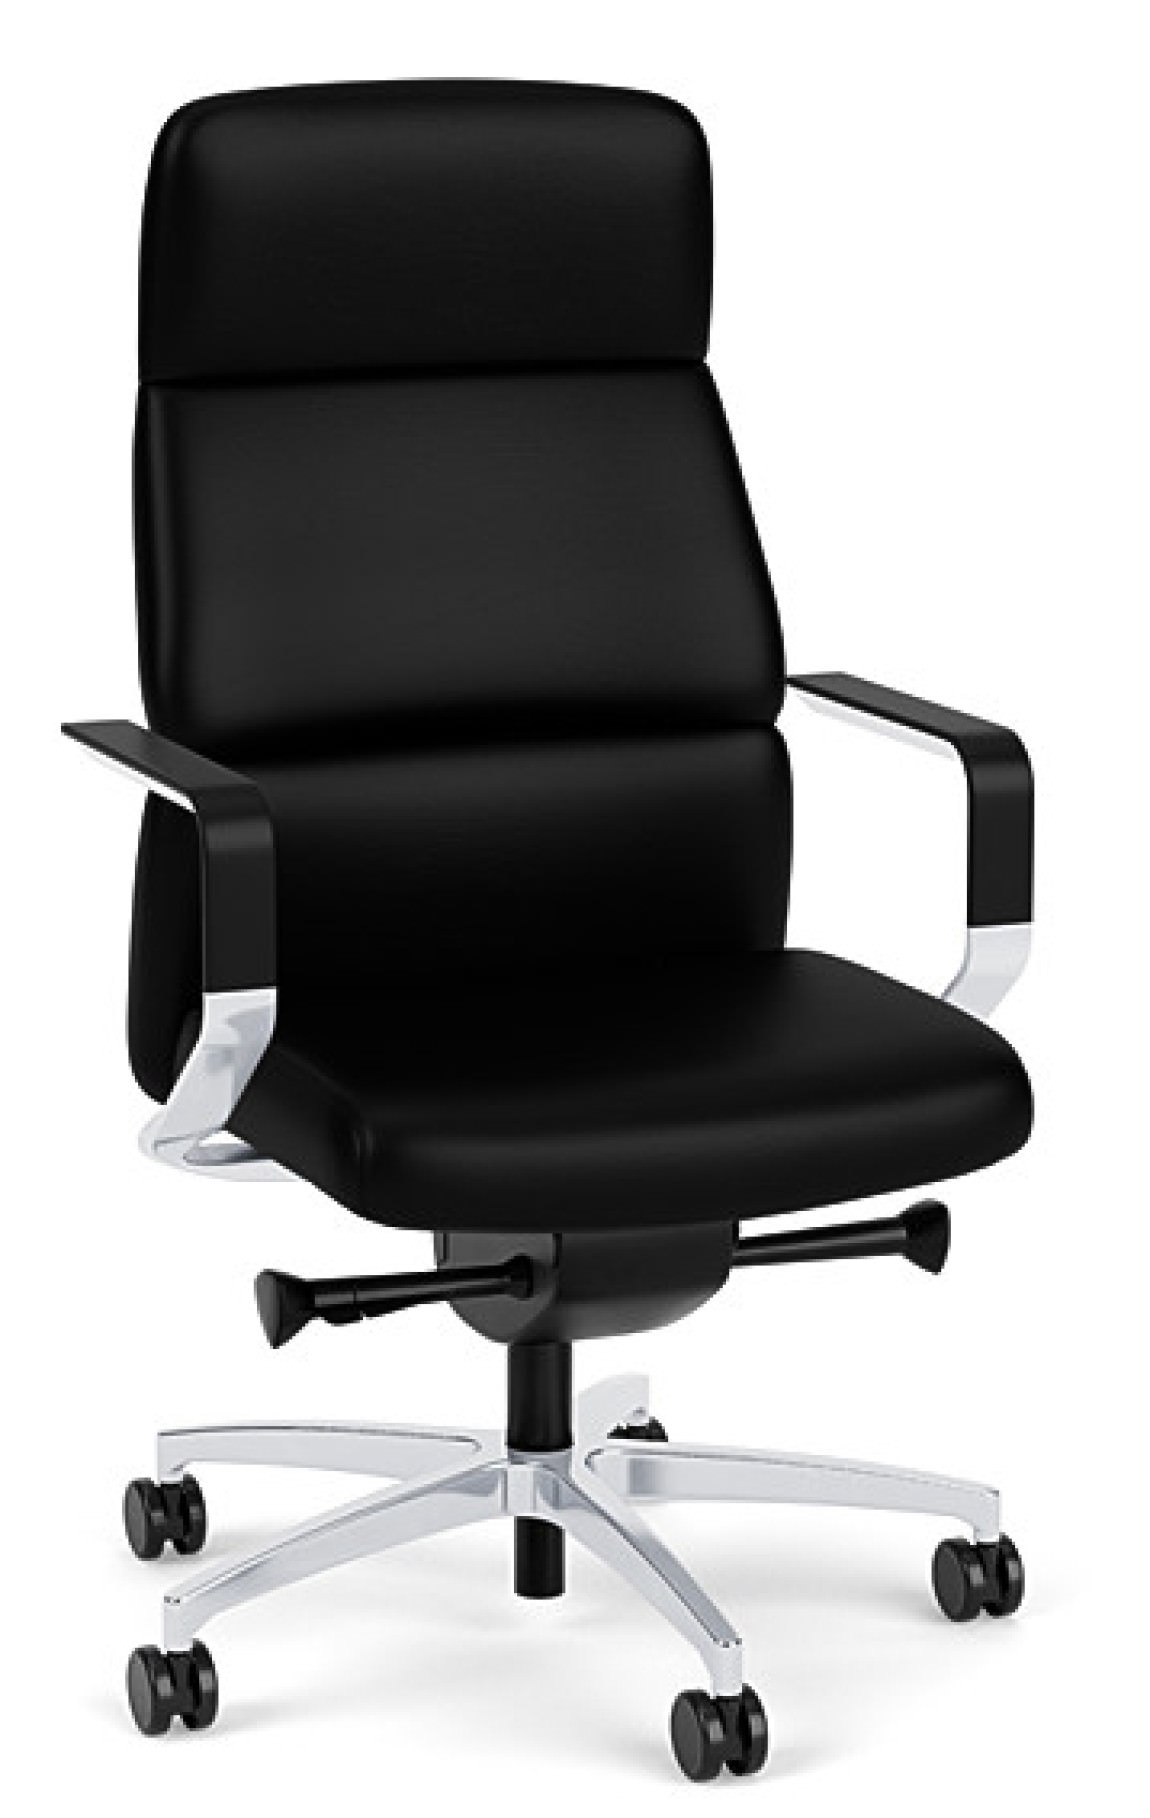 Executive Leather Desk Conference Room Chair